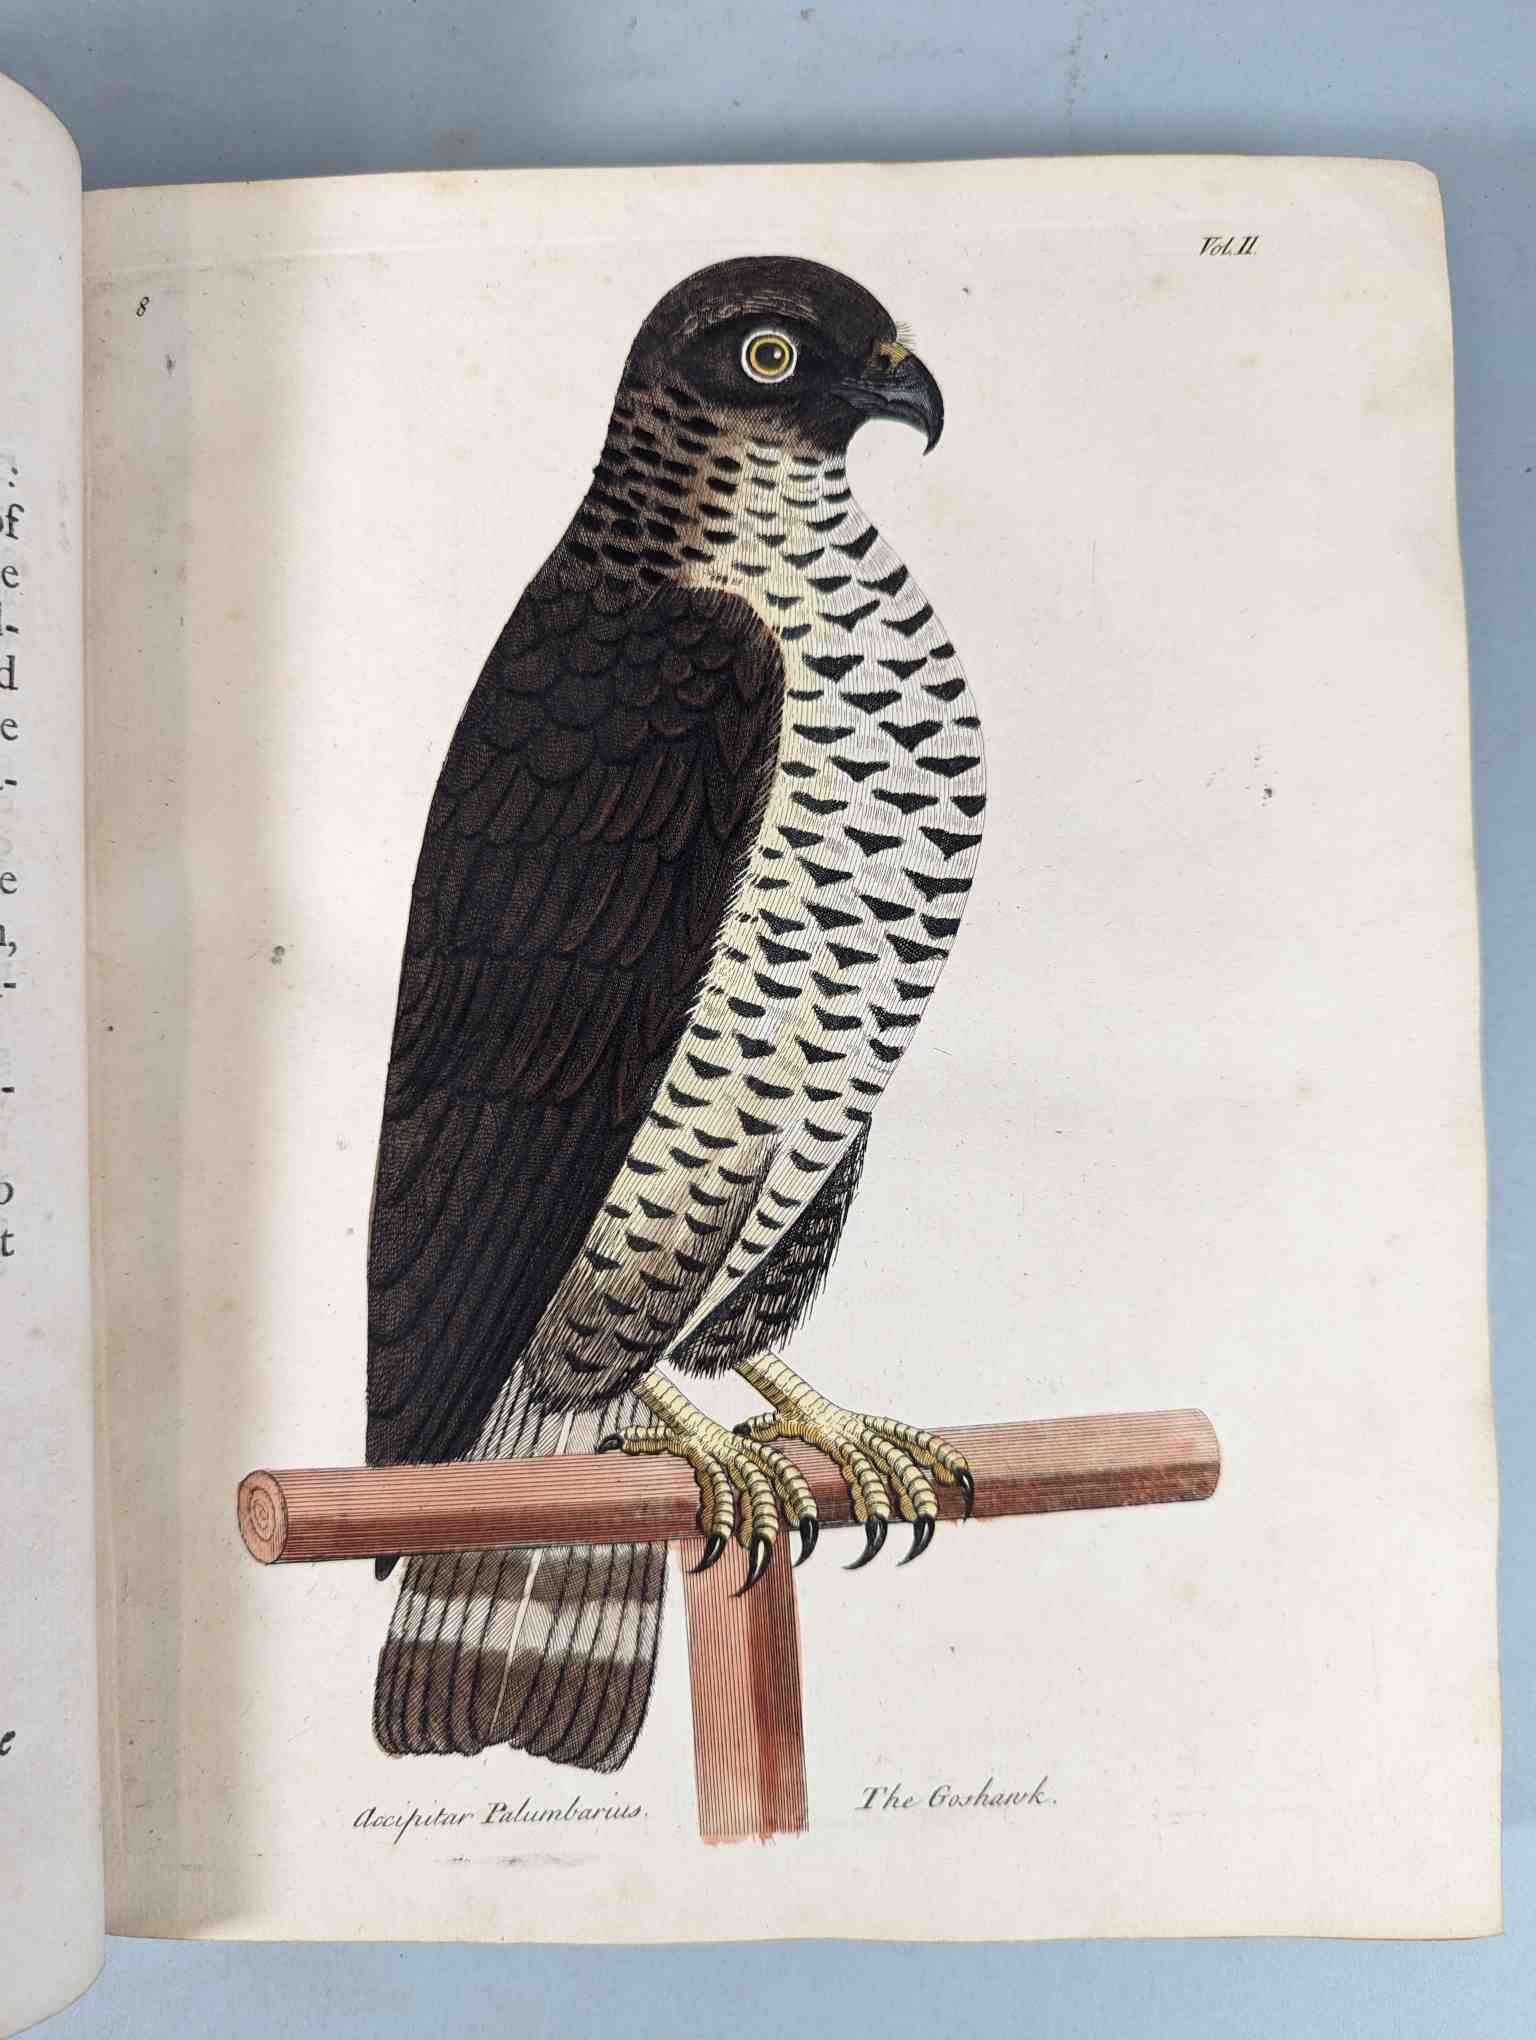 ALBIN, Eleazar. A Natural History of Birds, to which are added, Notes and Observations by W. - Image 112 of 208